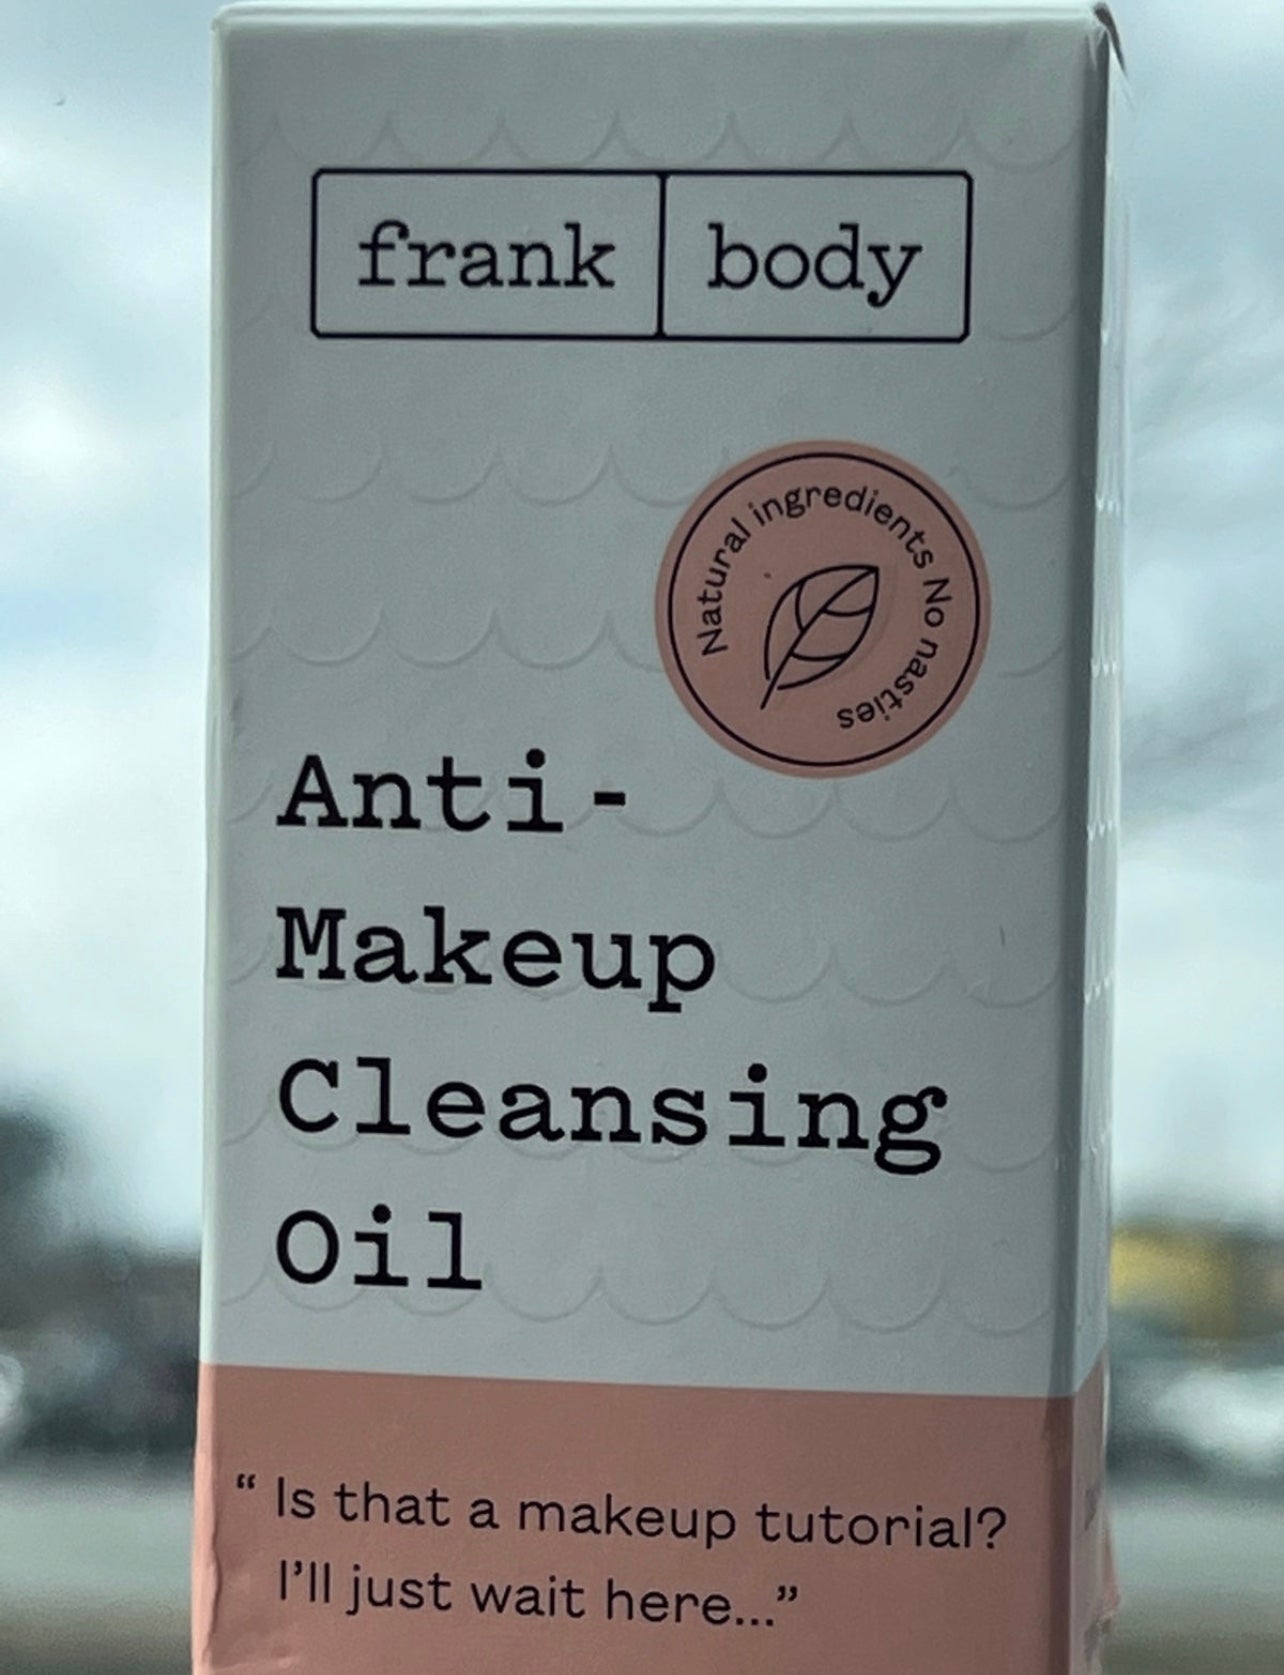 FRANK BODY Anti-Makeup Cleansing Oil